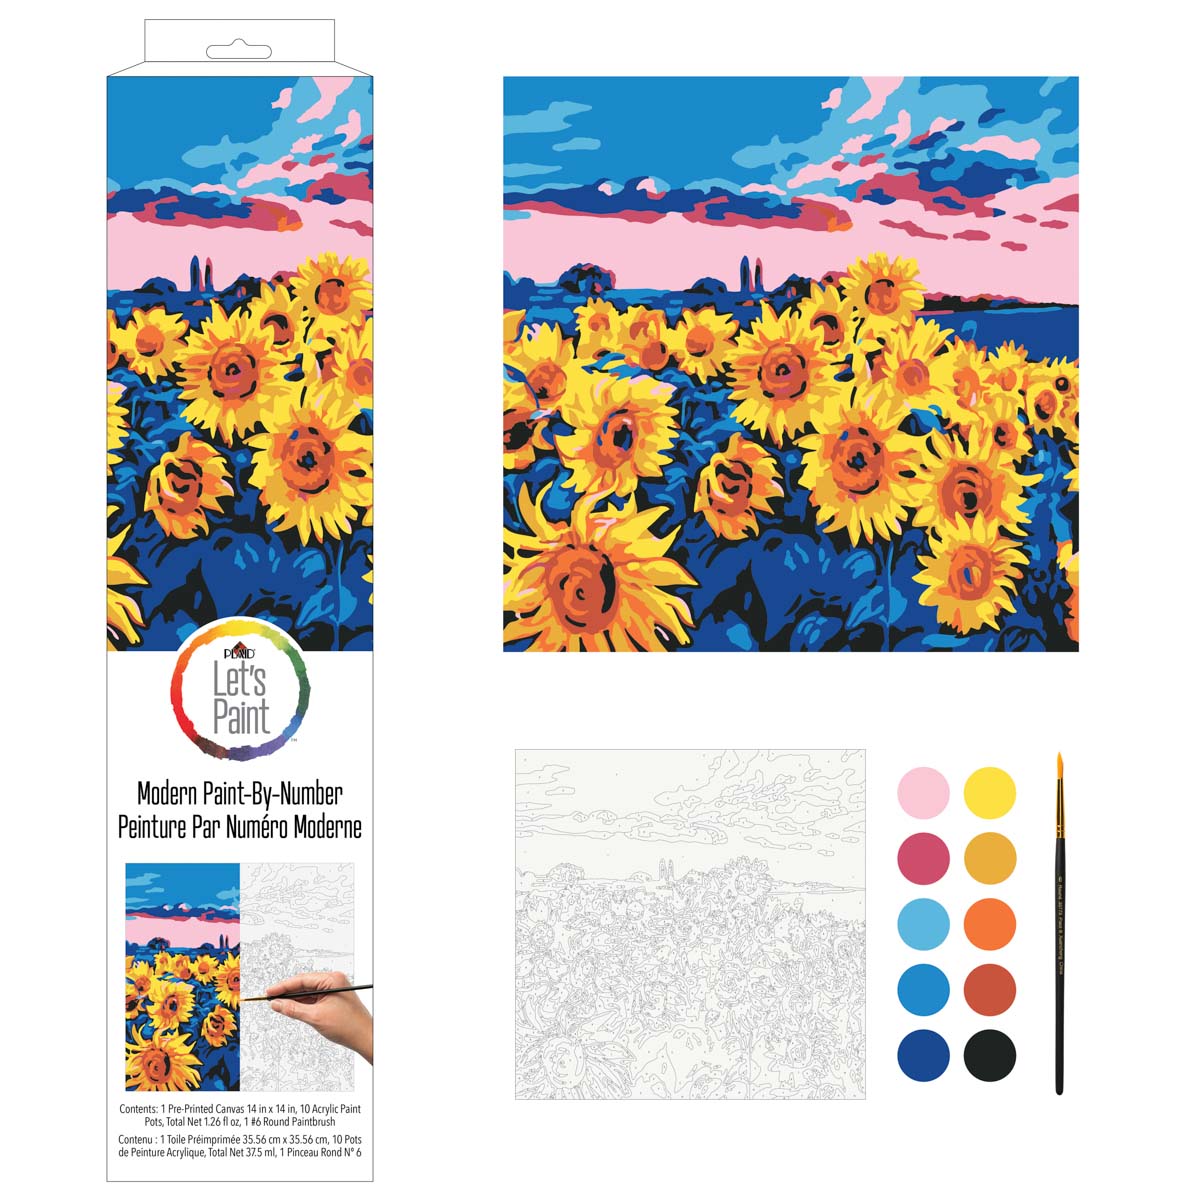 Plaid ® Let's Paint™ Modern Paint-by-Number - Sunflower Meadow - 17874